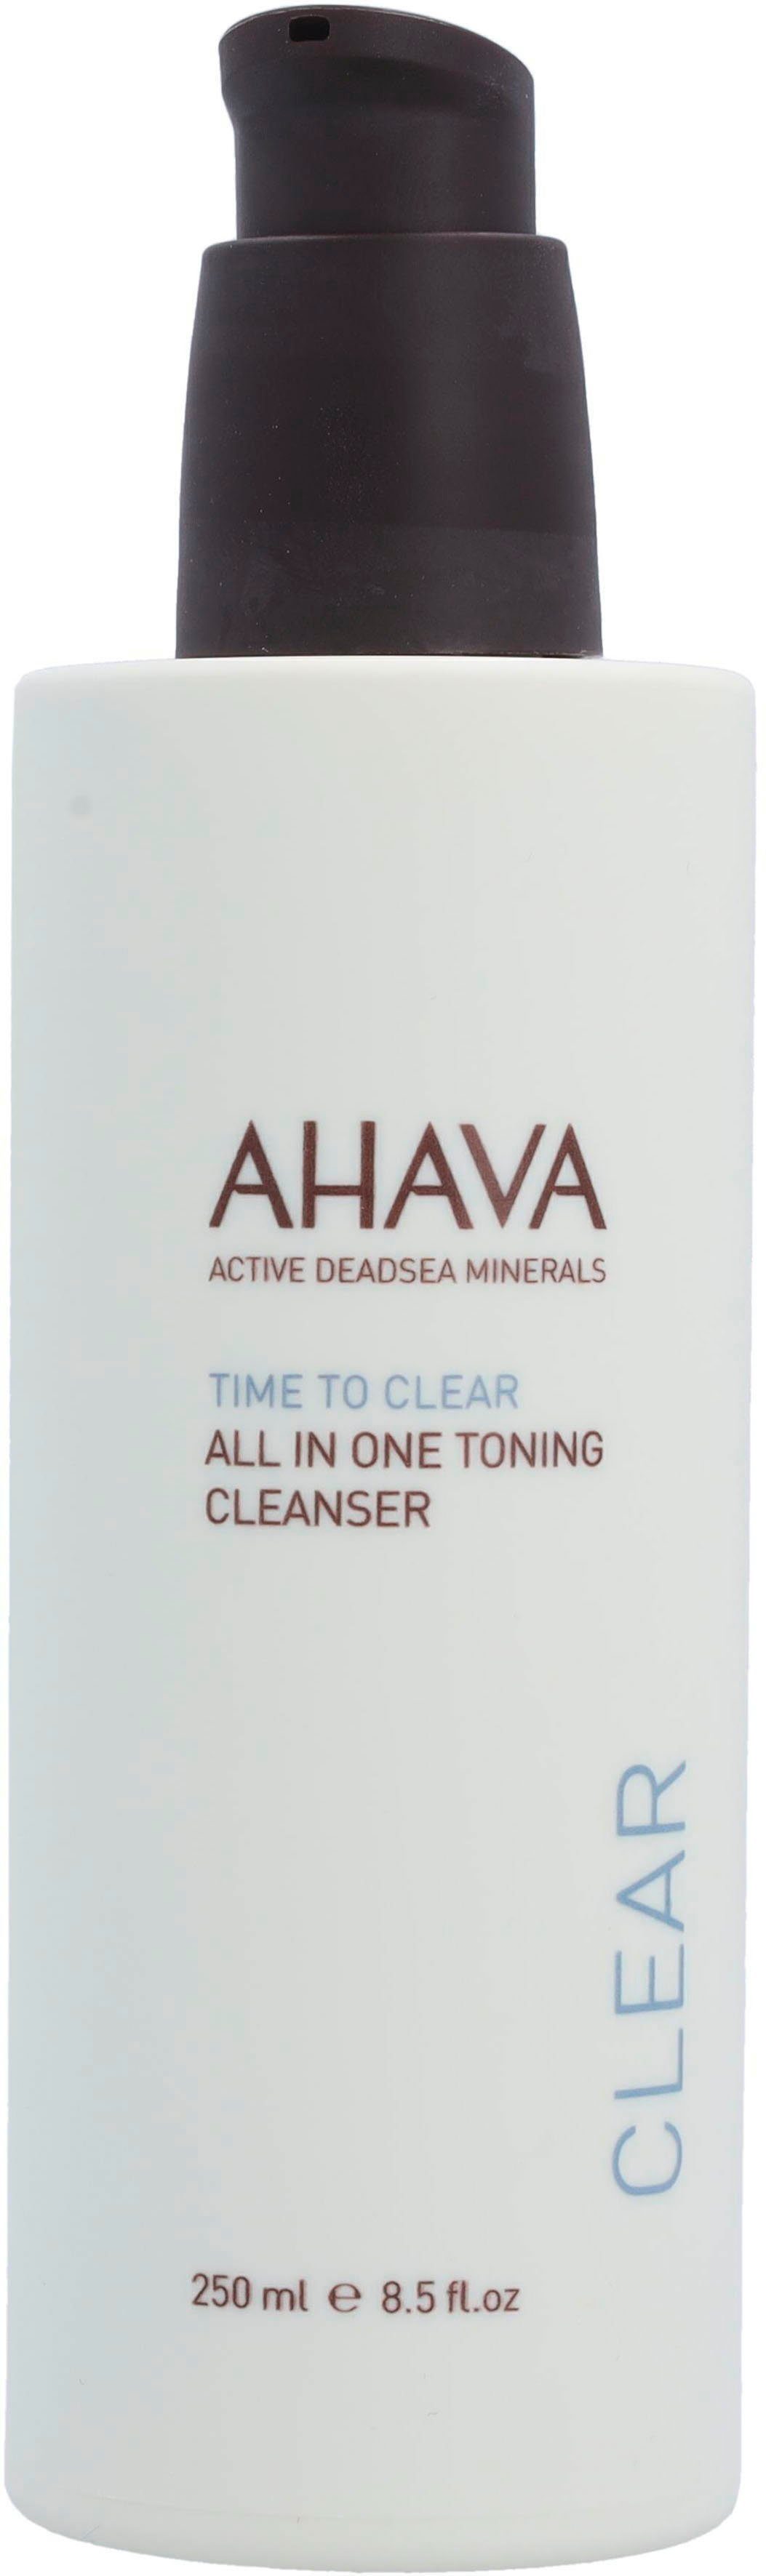 AHAVA Gesichts-Reinigungslotion Clear All Toning One Time To Cleanser In